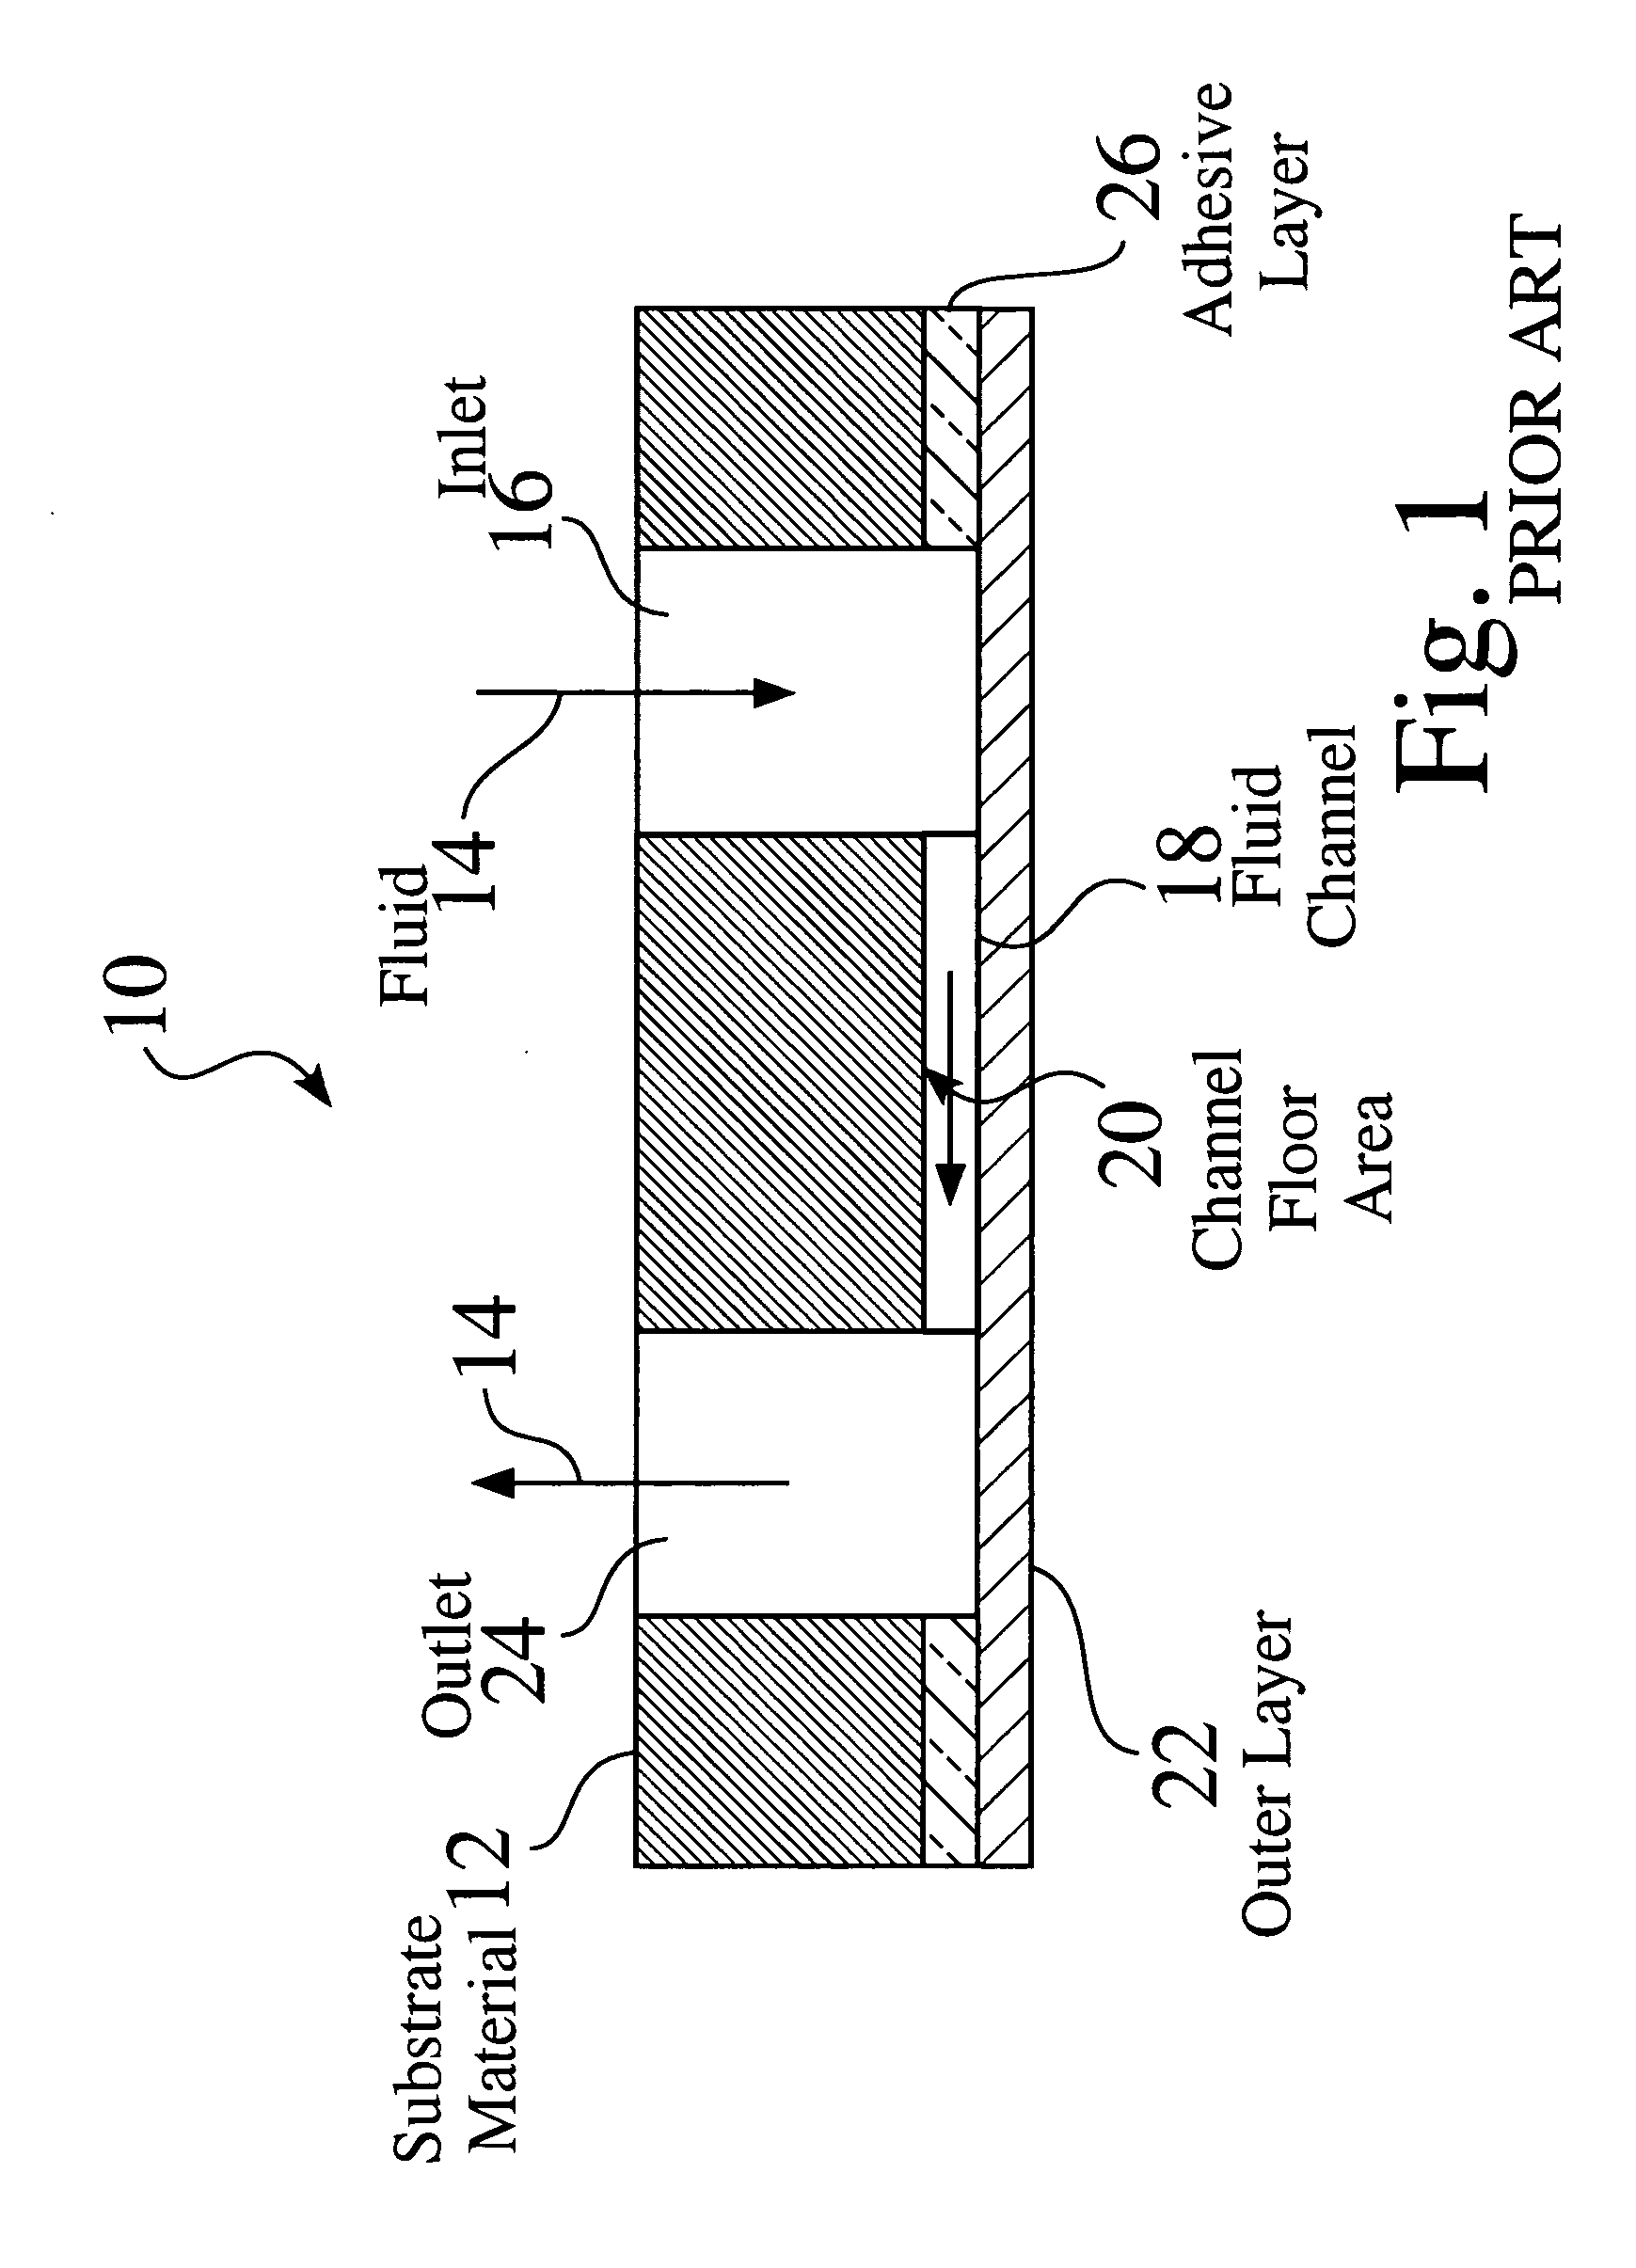 Microfluidic system with integrated permeable membrane